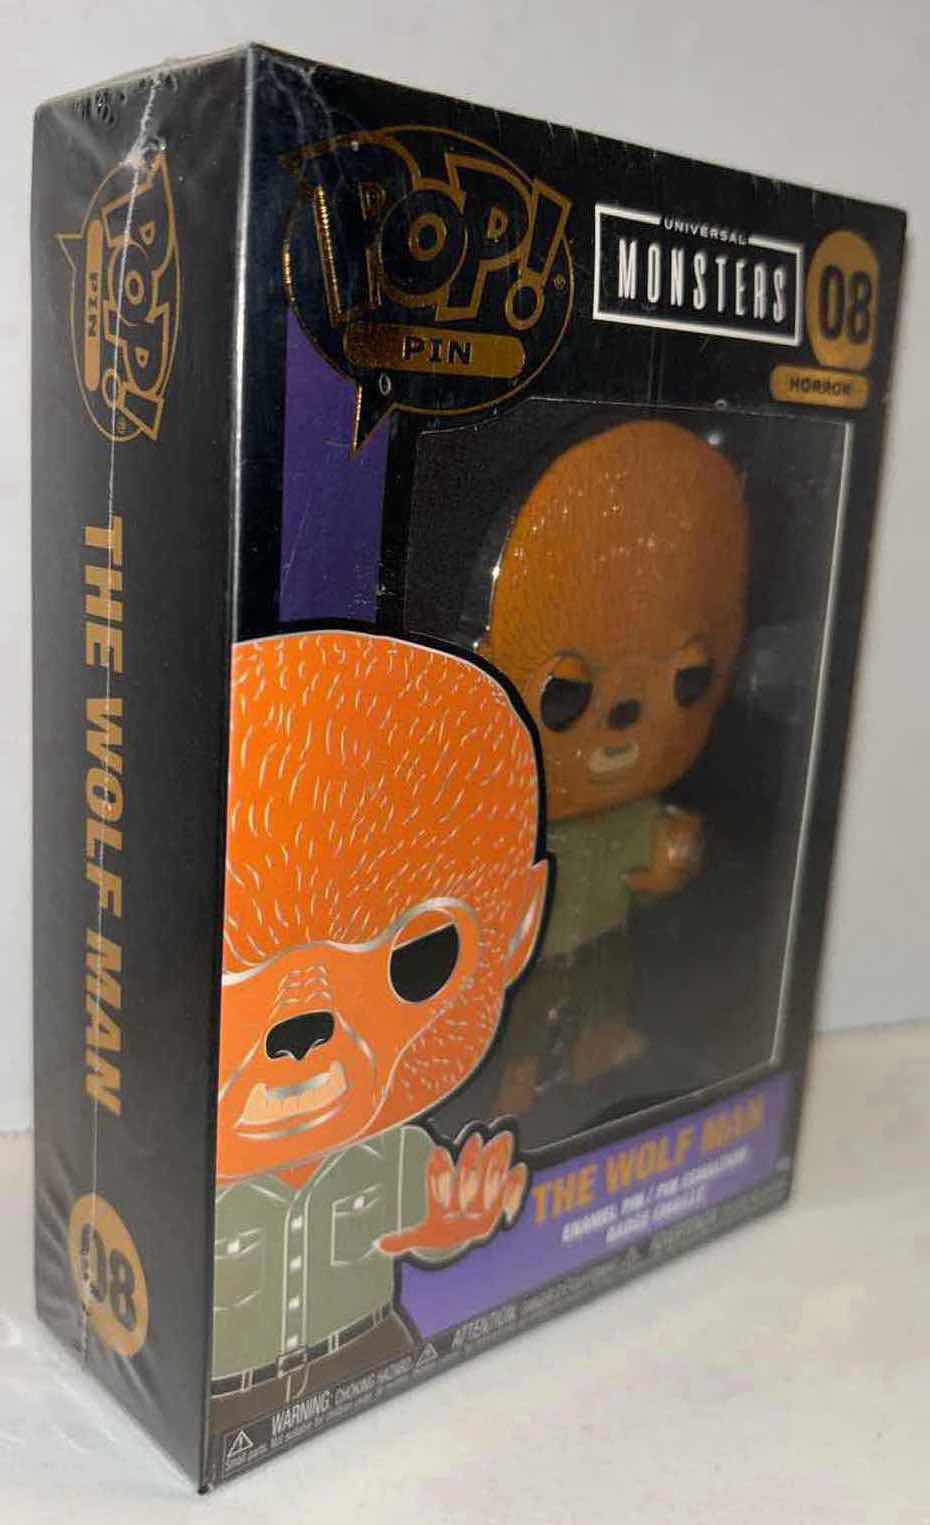 Photo 1 of NEW FUNKO POP! PIN, UNIVERSAL MONSTERS HORROR #08 THE WOLF MAN ENAMEL PIN